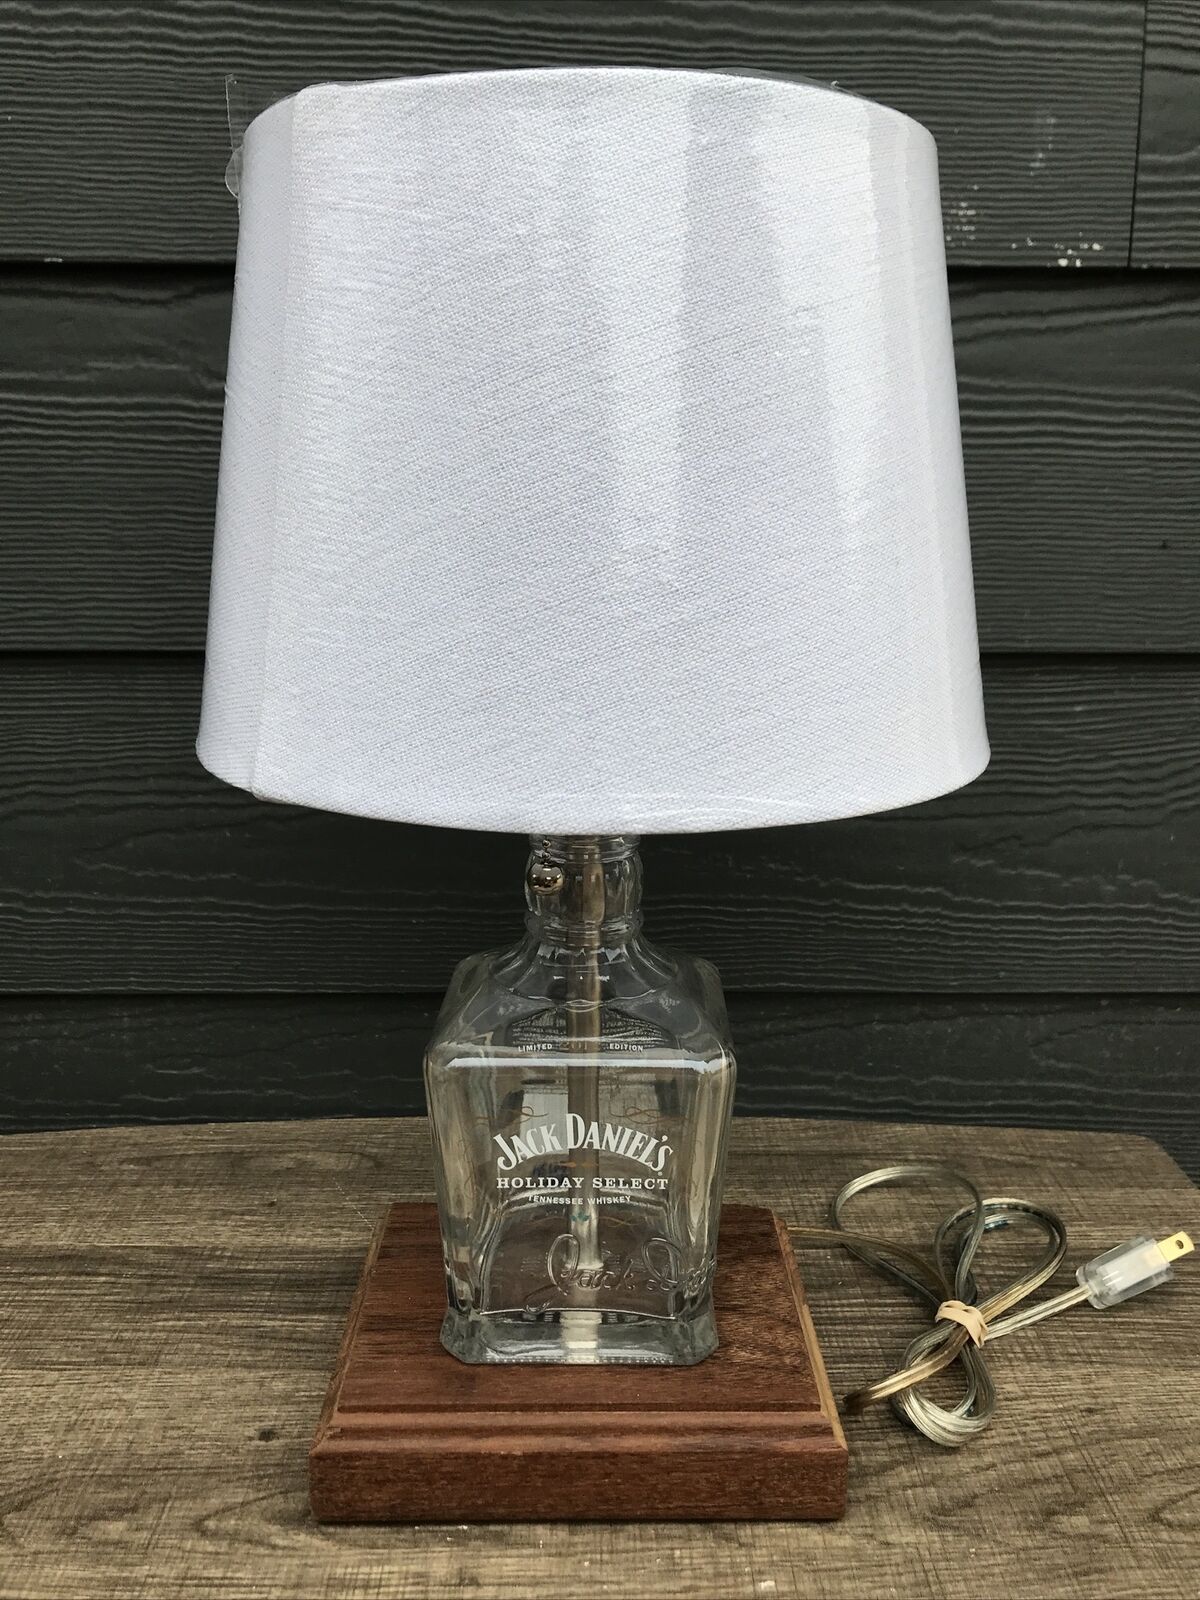 Jack Daniels Bottle Lamp, Upcycled Lamp, Unique Accent Lamp Man Cave Pool Room